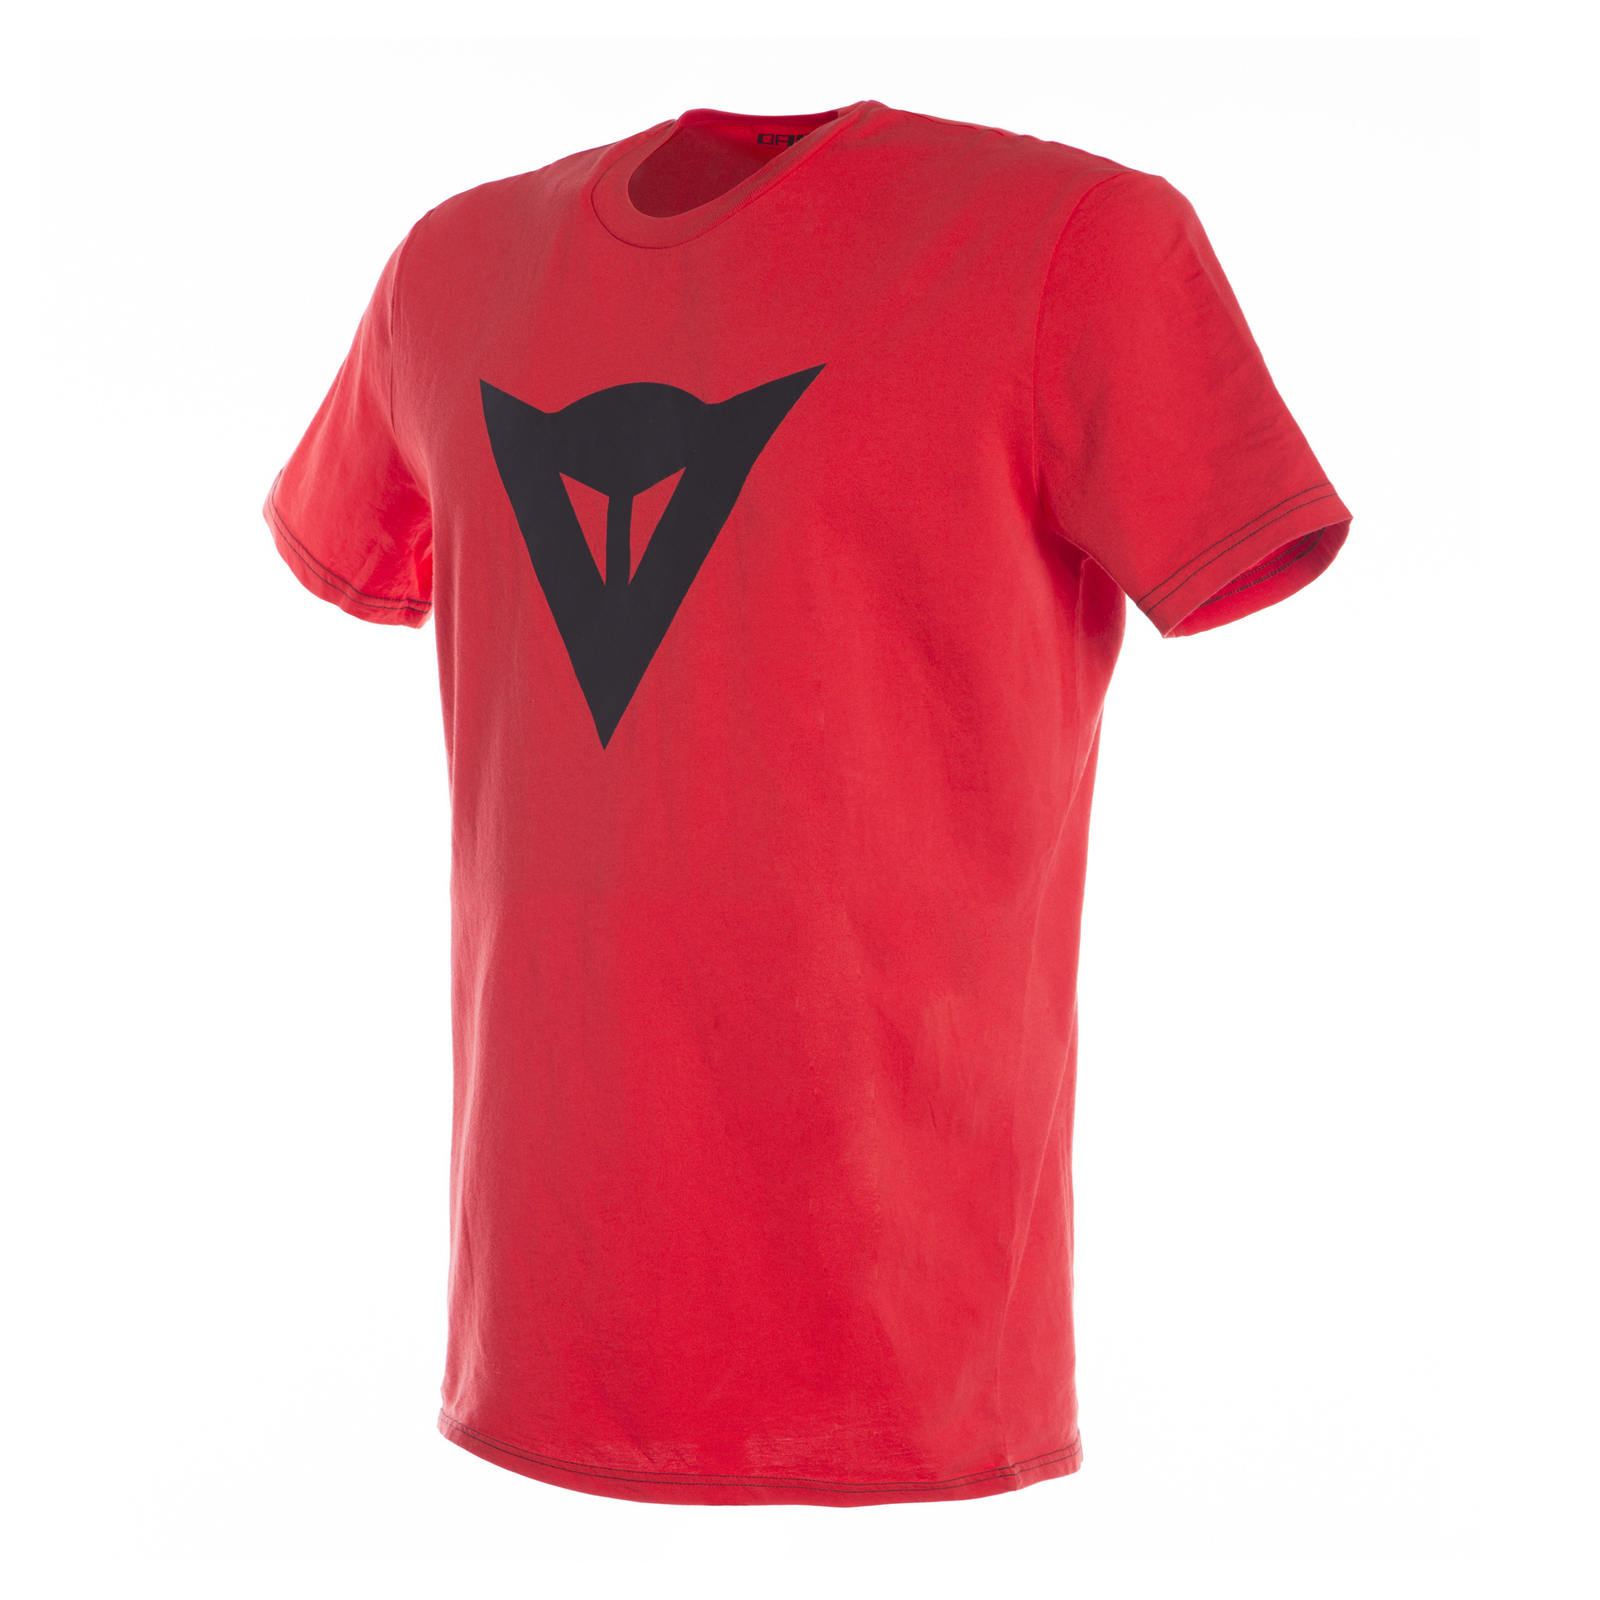 DAINESE CASUAL SPEED DEMON T-SHIRT RED/BLACK S